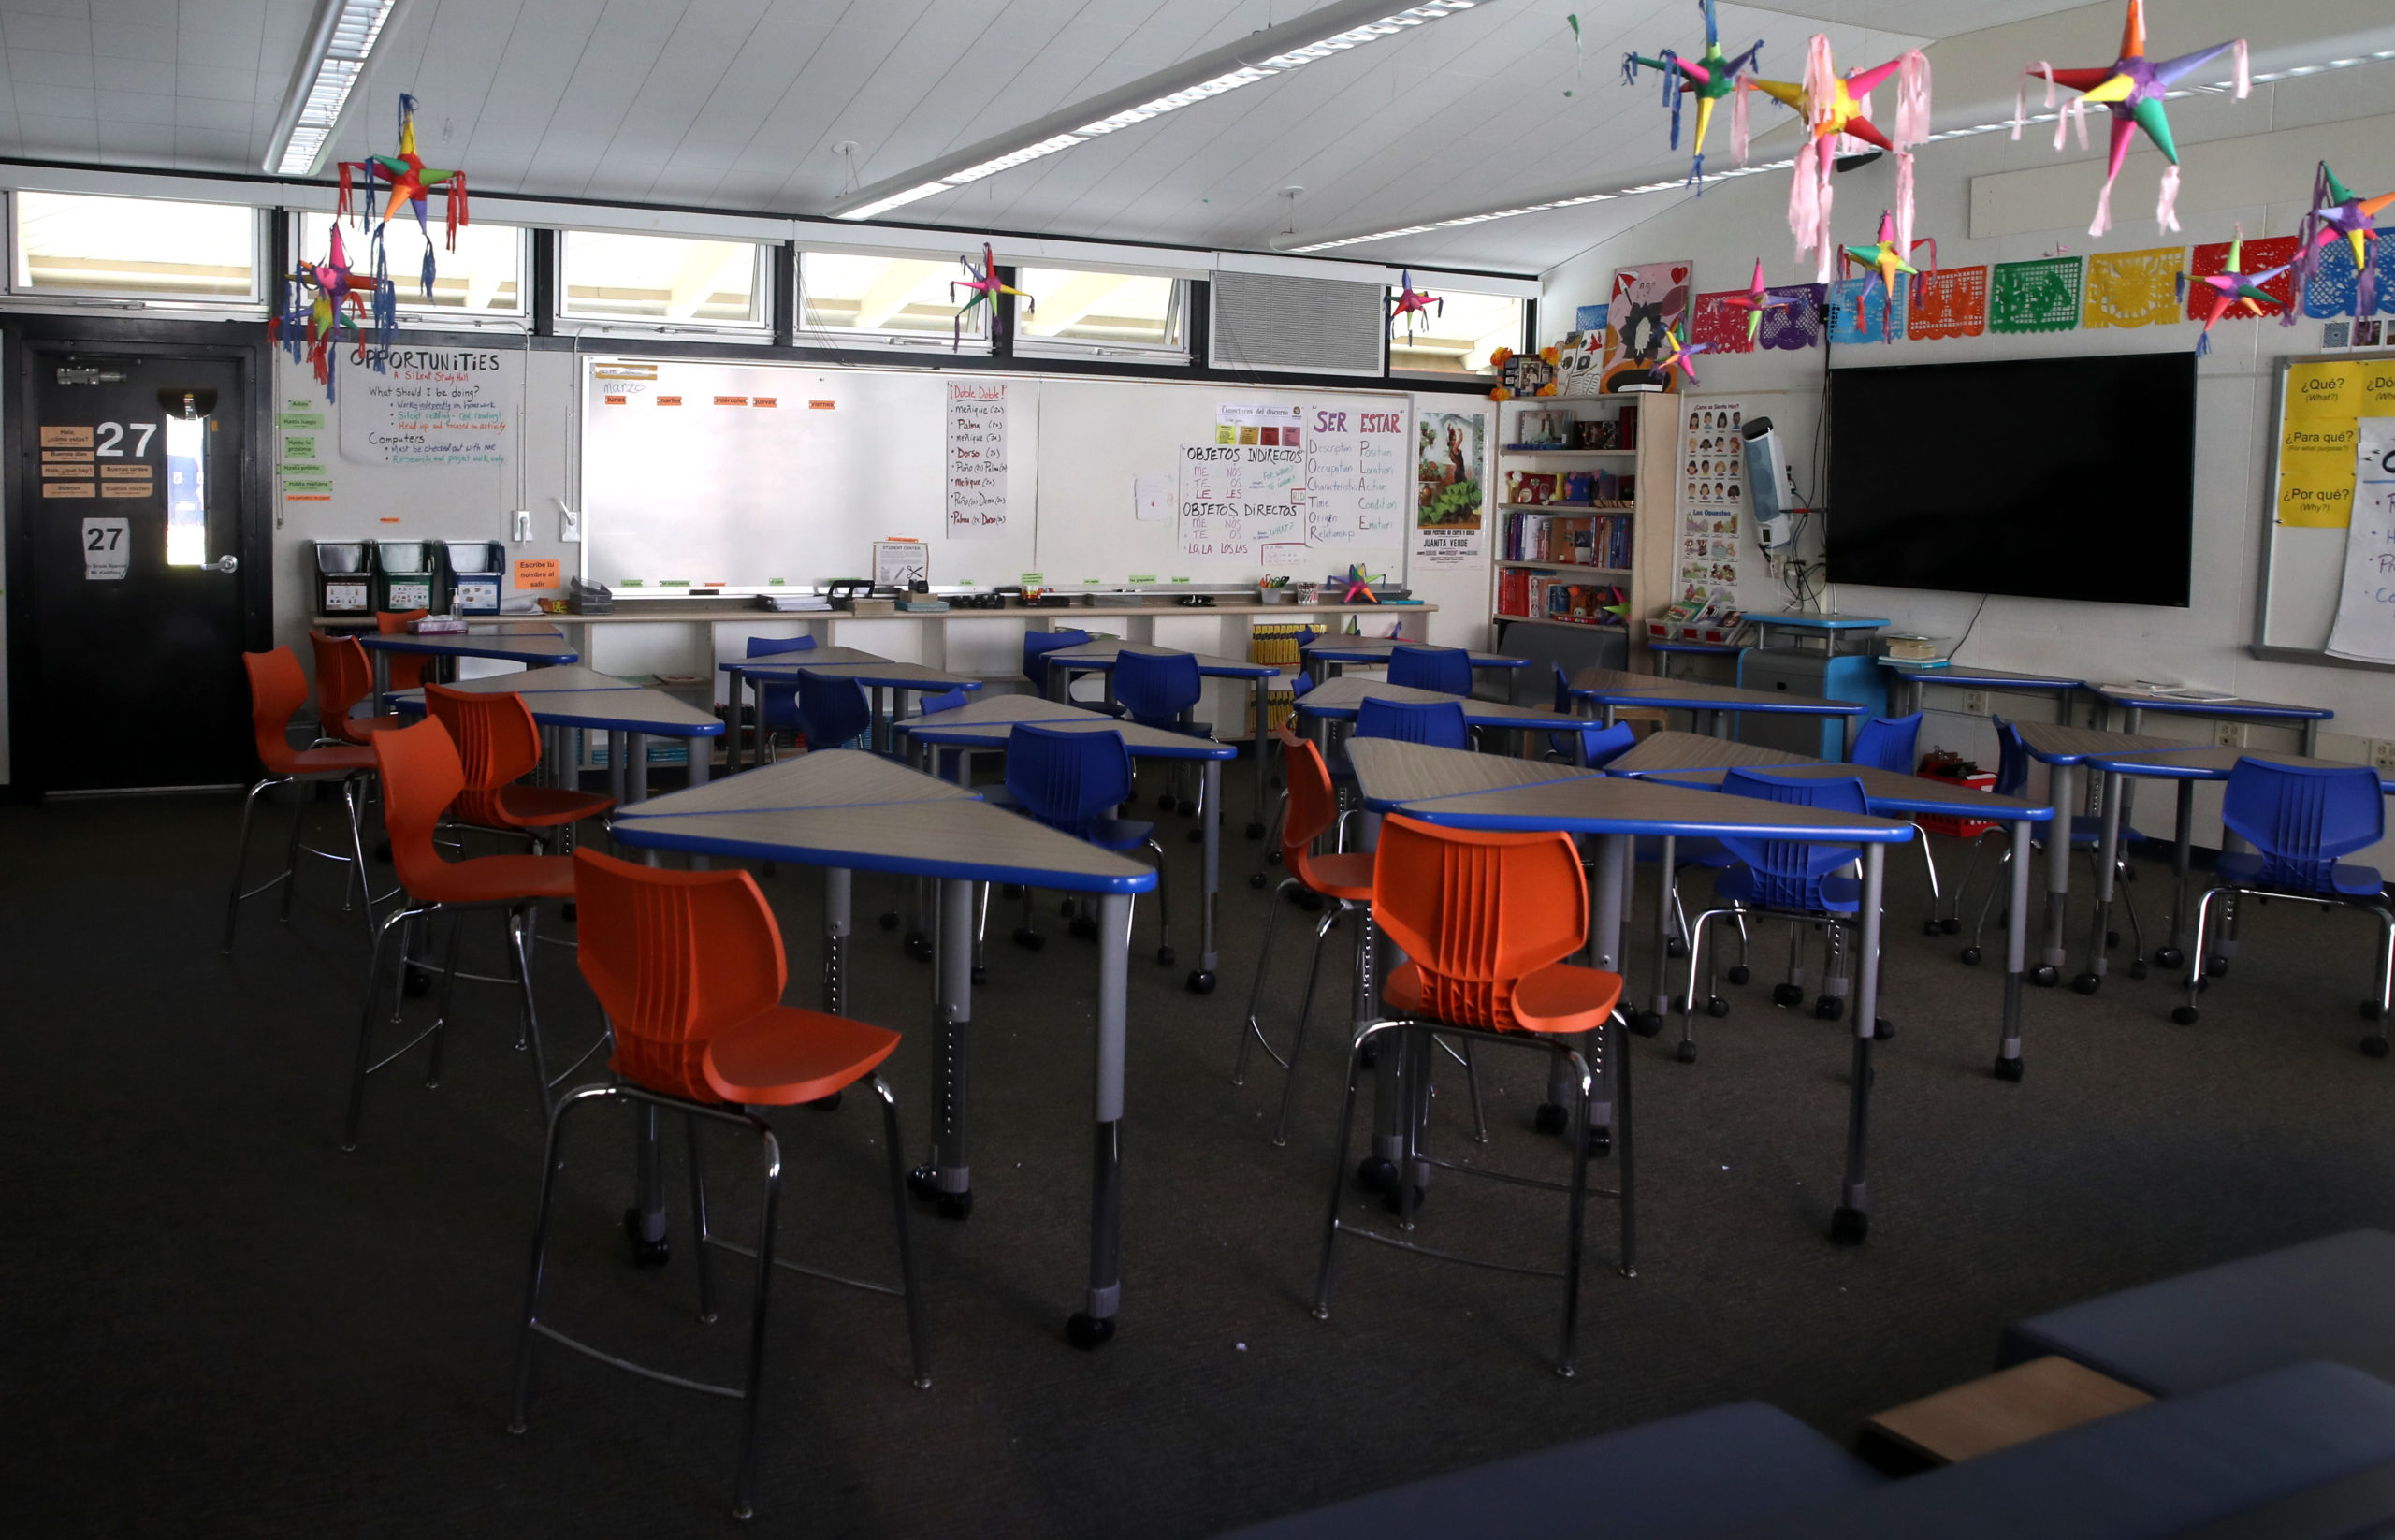 A classroom sits empty at Kent Middle School on April 01, 2020 in Kentfield, California. California Gov. Gavin Newsom announced that schools will remain closed through the end of the academic year due to shelter-in-place orders necessitated by COVID-19 pandemic. (Photo by Justin Sullivan/Getty Images)